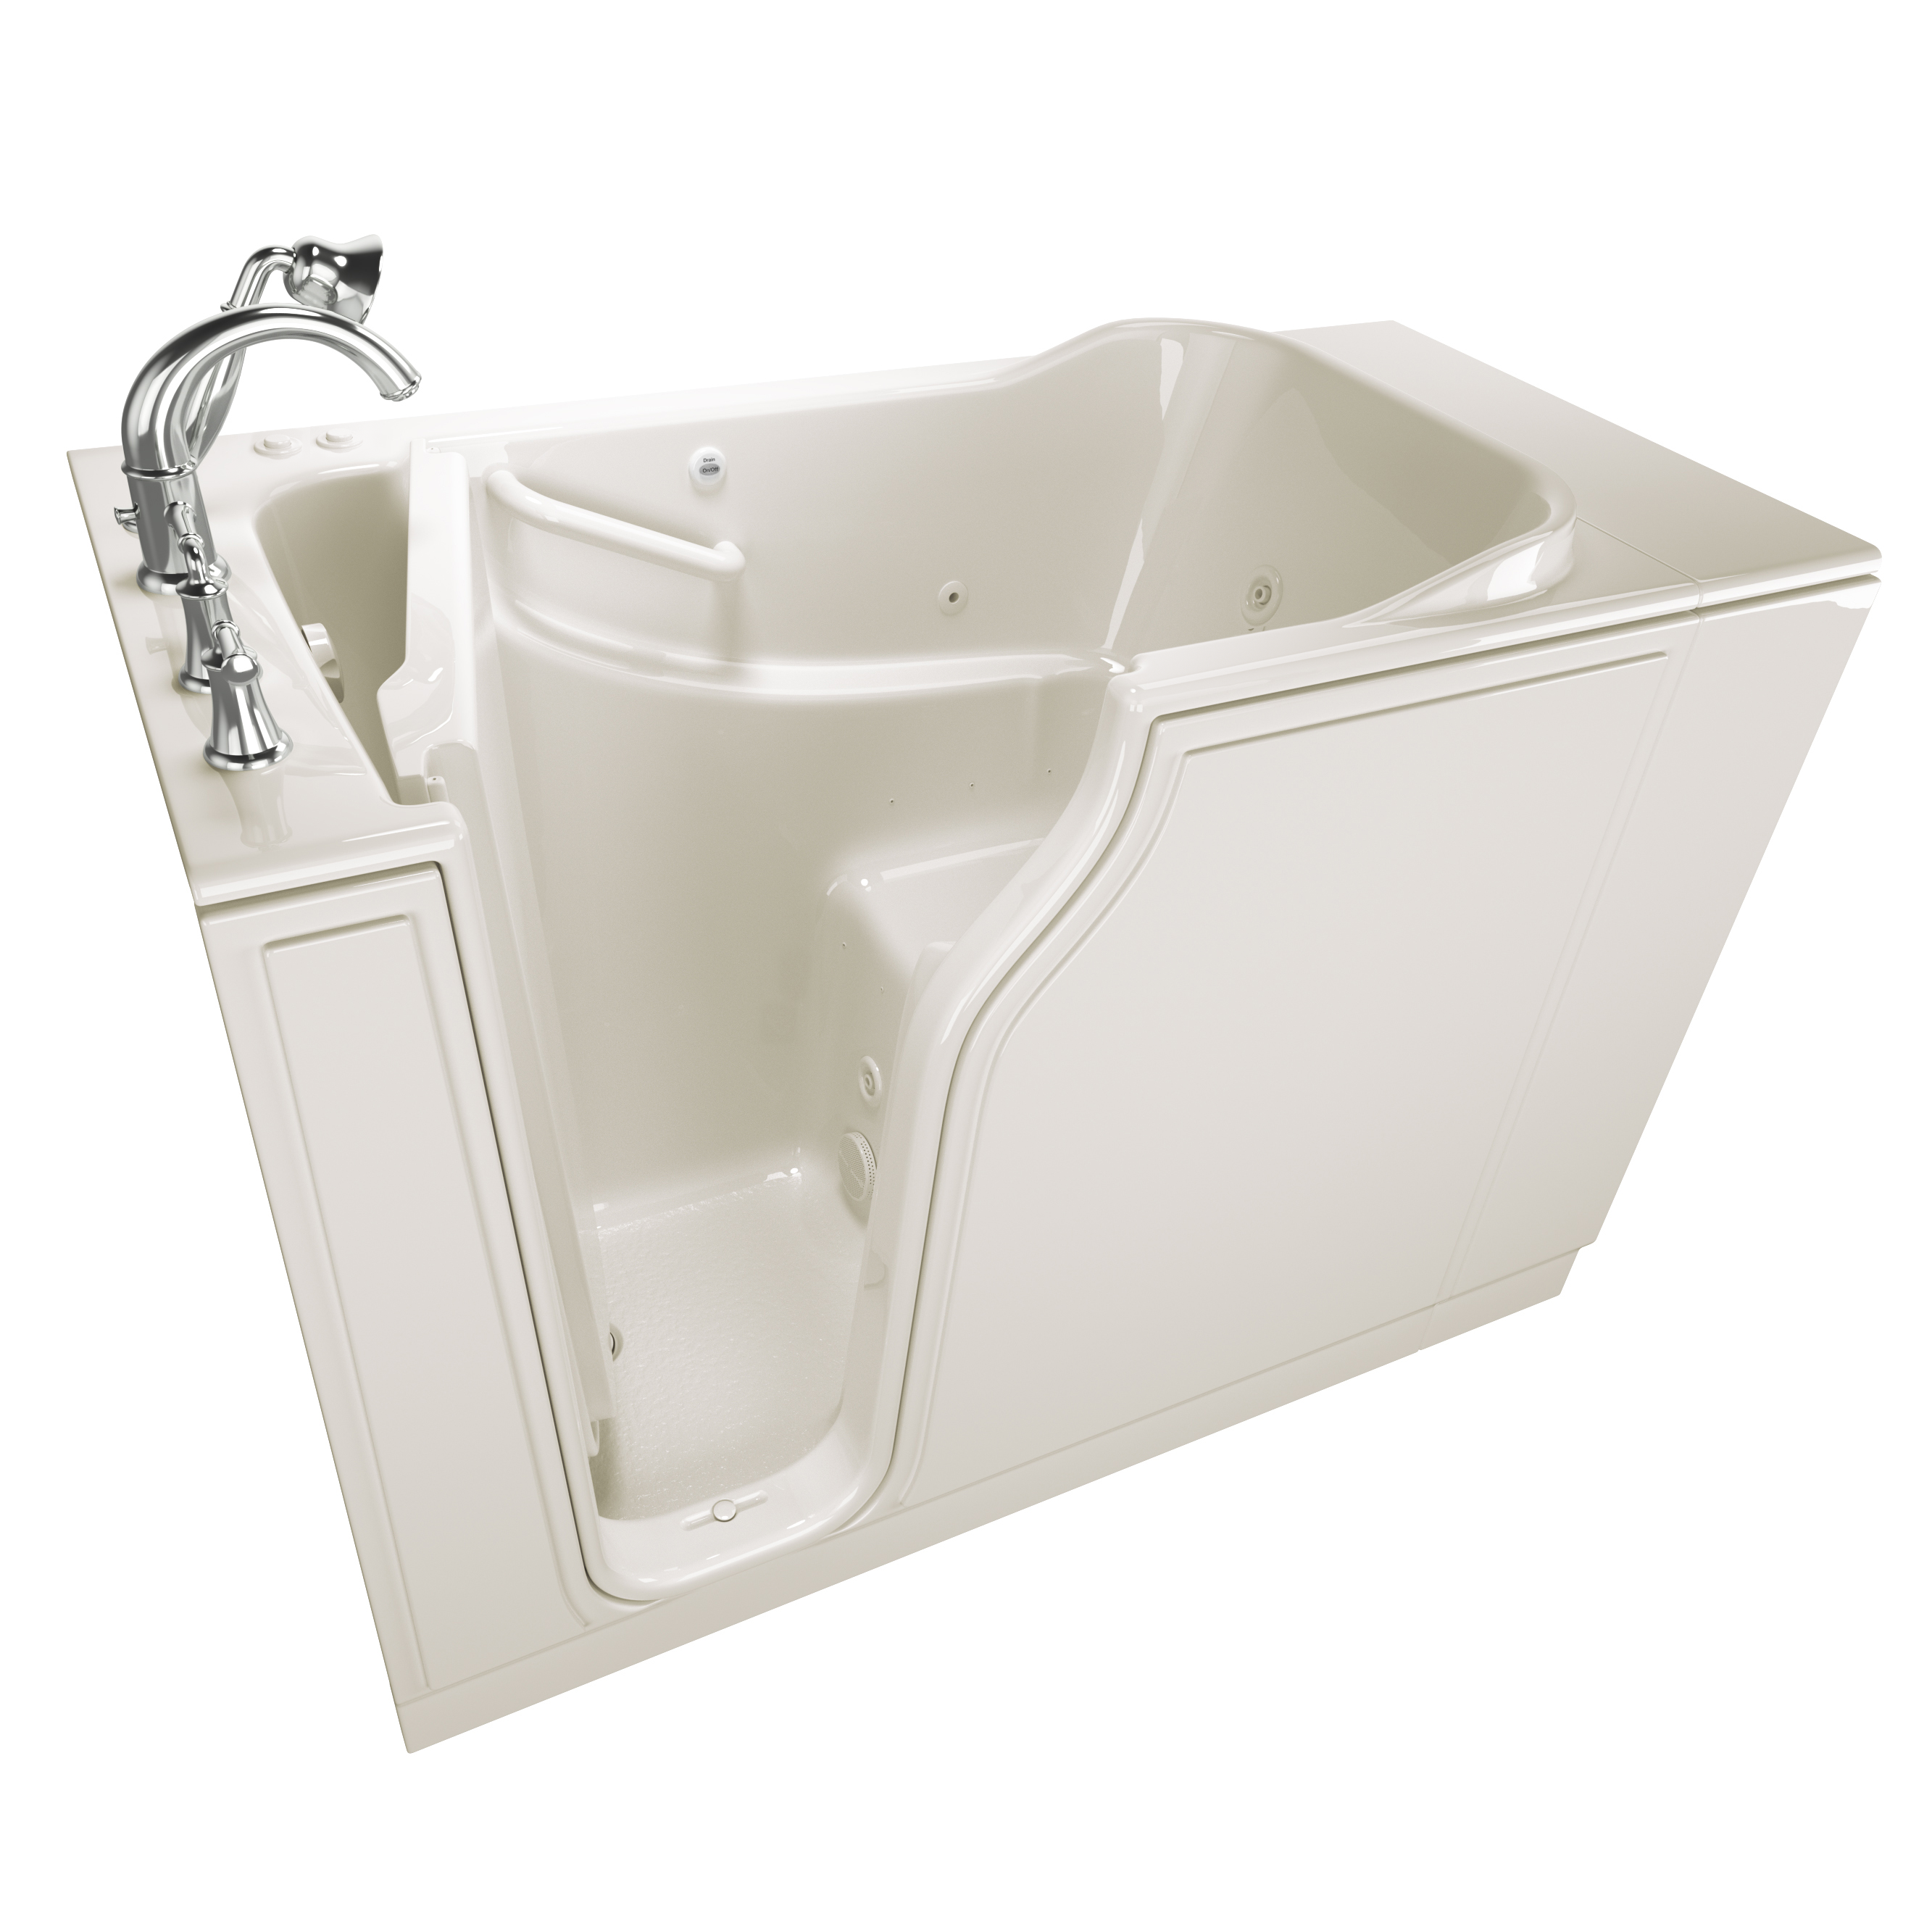 Gelcoat Value Series 30 x 52 -Inch Walk-in Tub With Combination Air Spa and Whirlpool Systems - Left-Hand Drain With Faucet